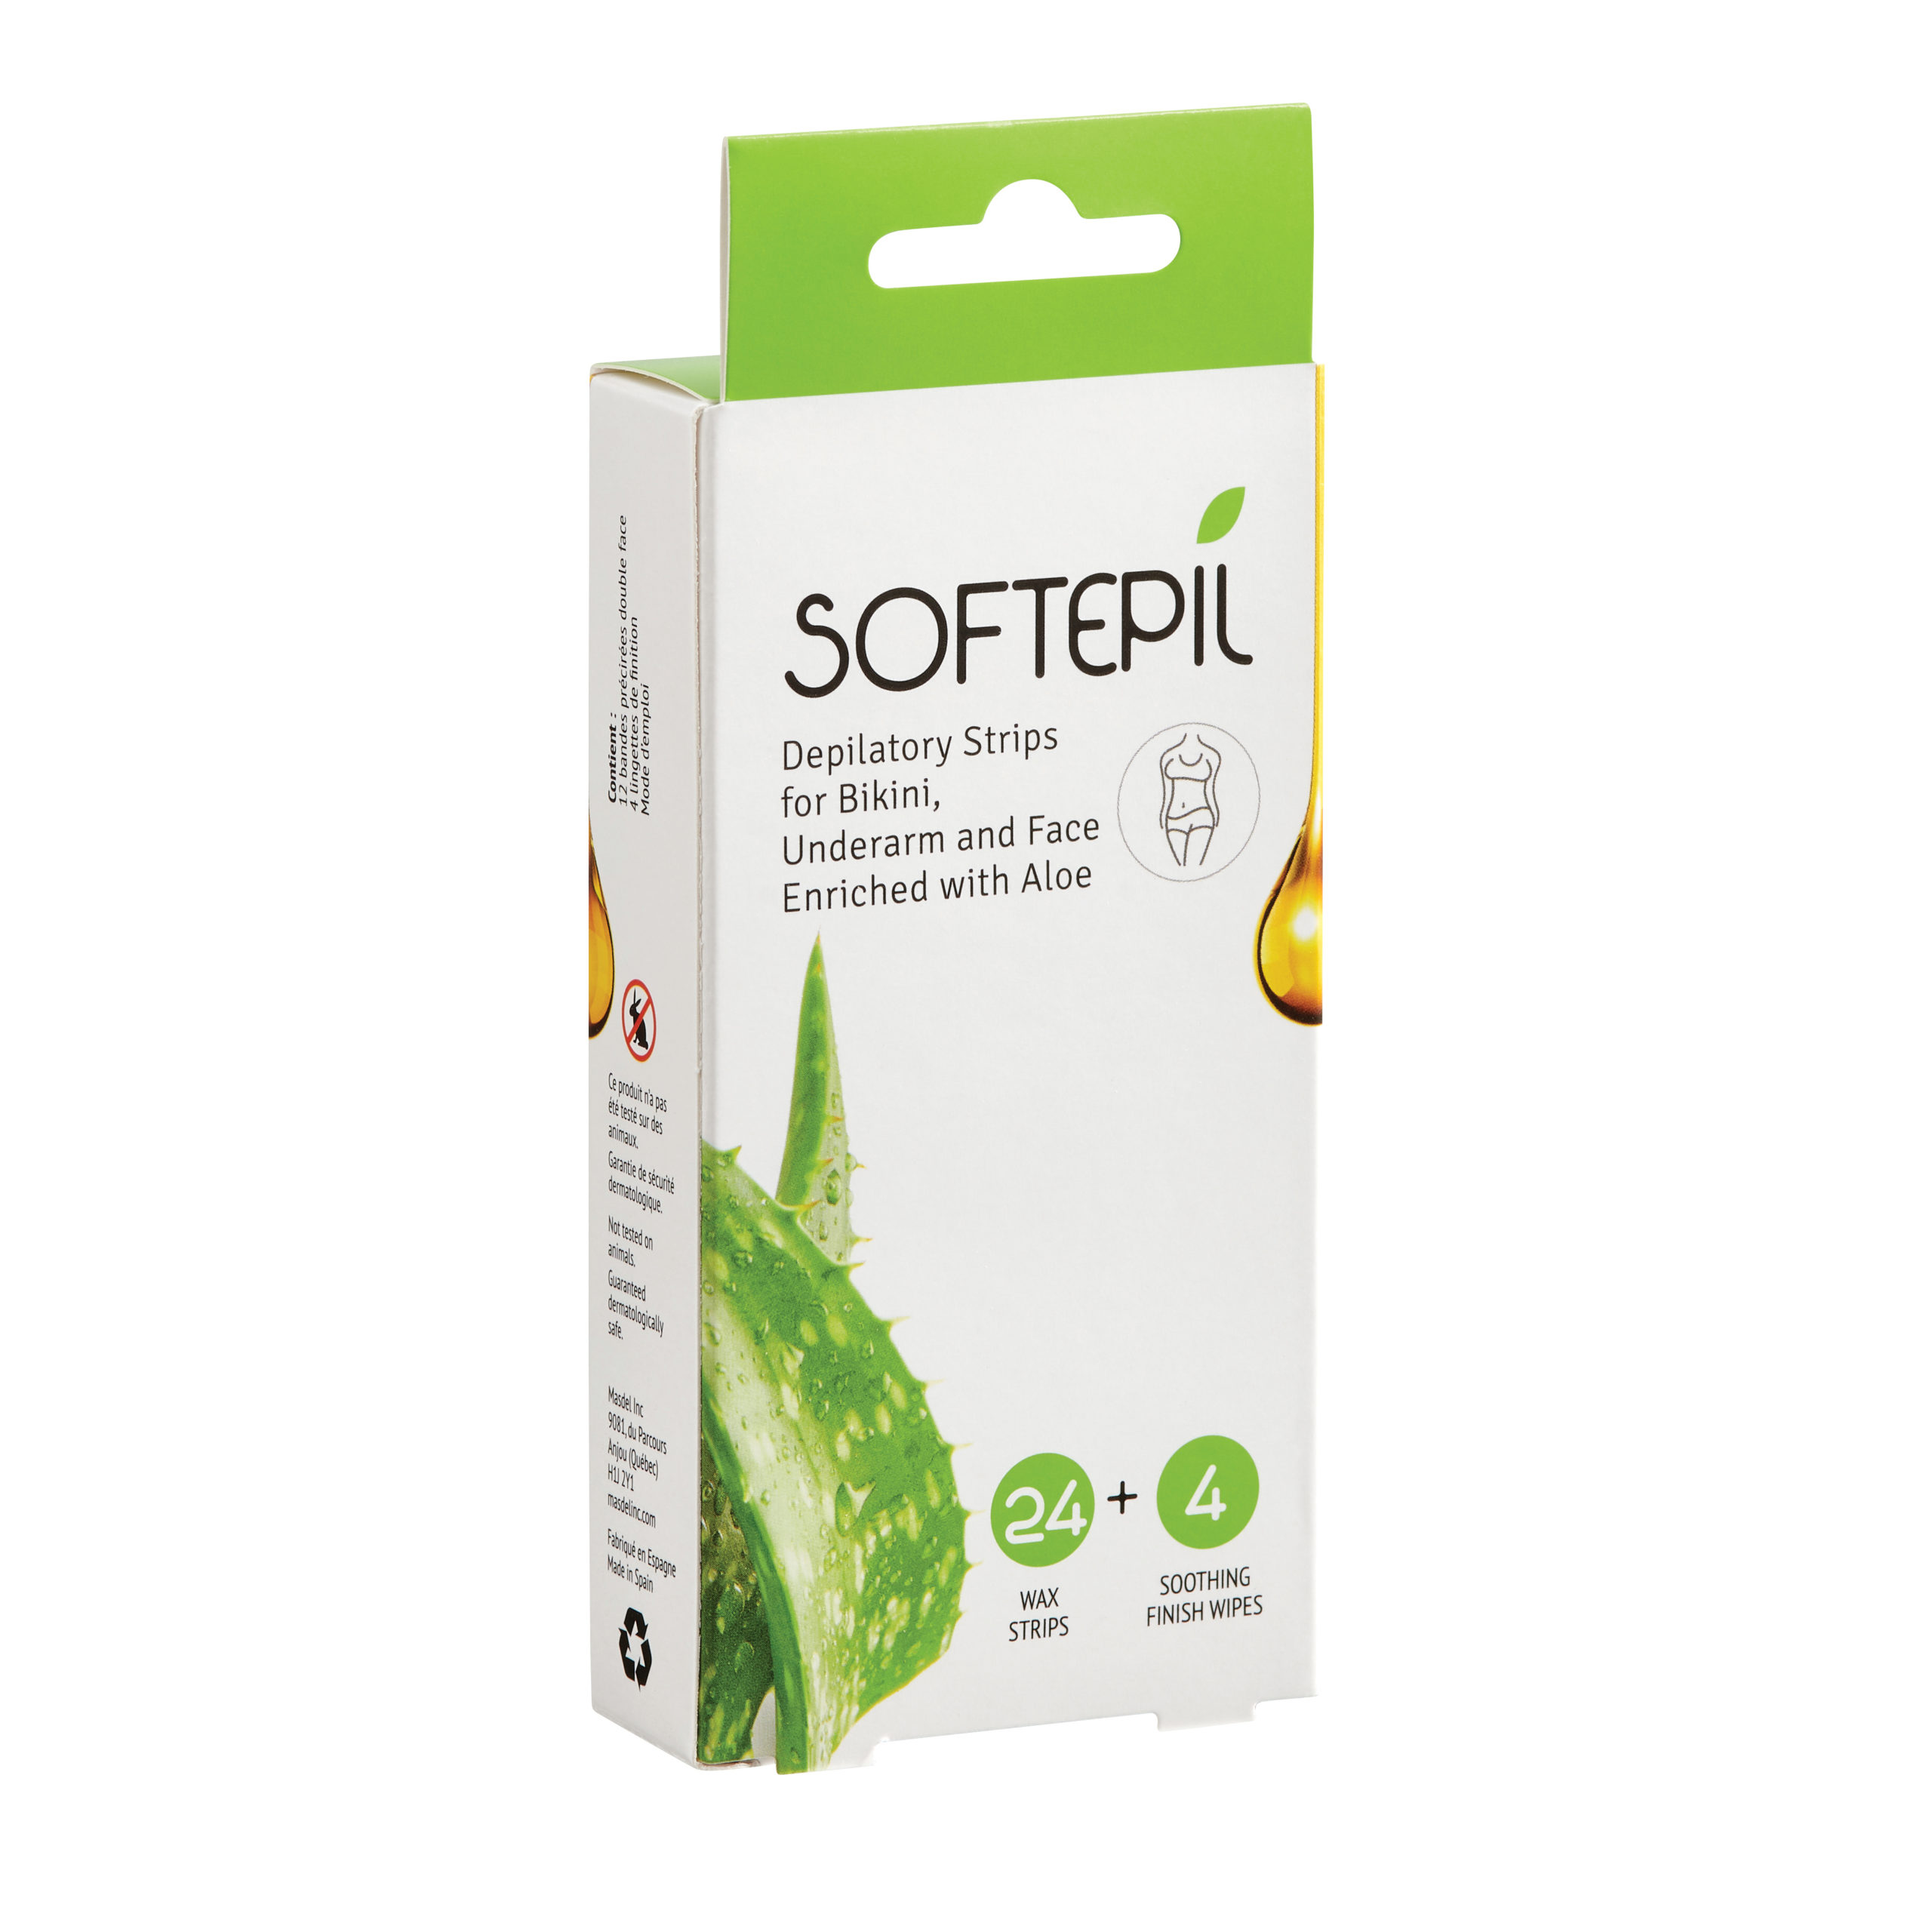 DEPILATORY STRIPS FOR bikini, underarm and face ENRICHED WITH ALOE VERA